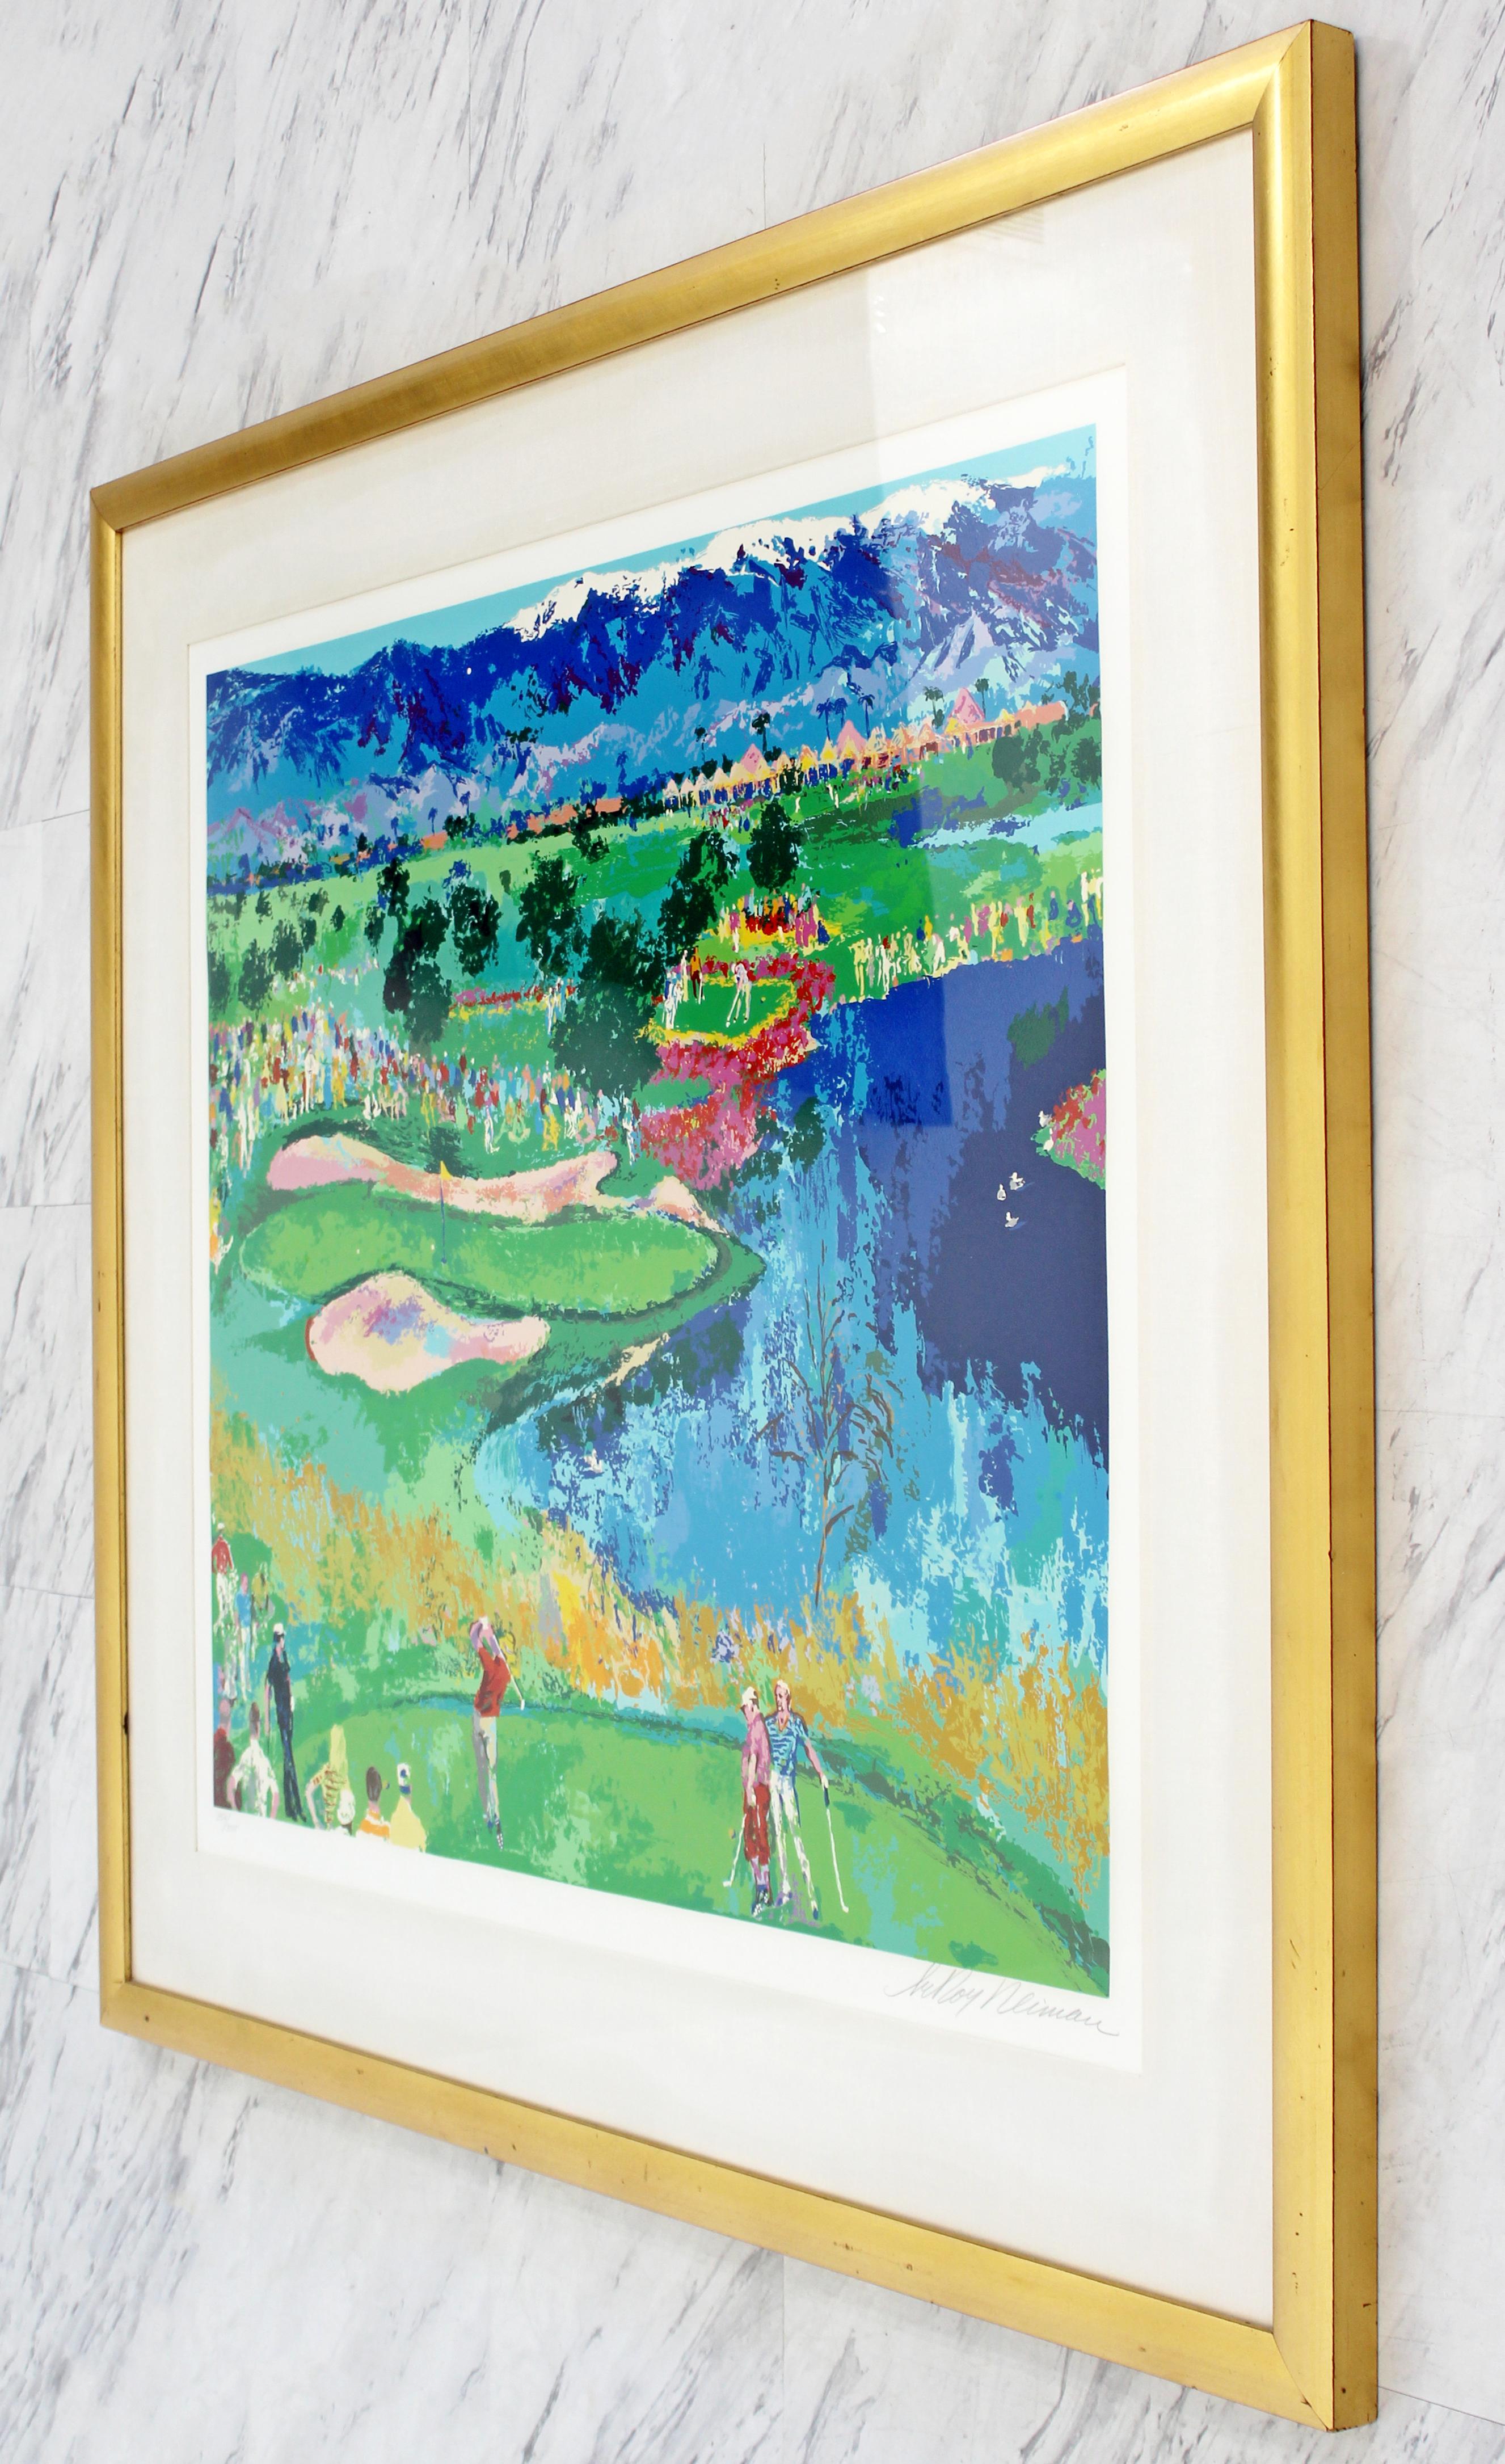 American Contemporary Modern Framed The Cove at Vintage Serigraph by Leroy Neiman 356/375